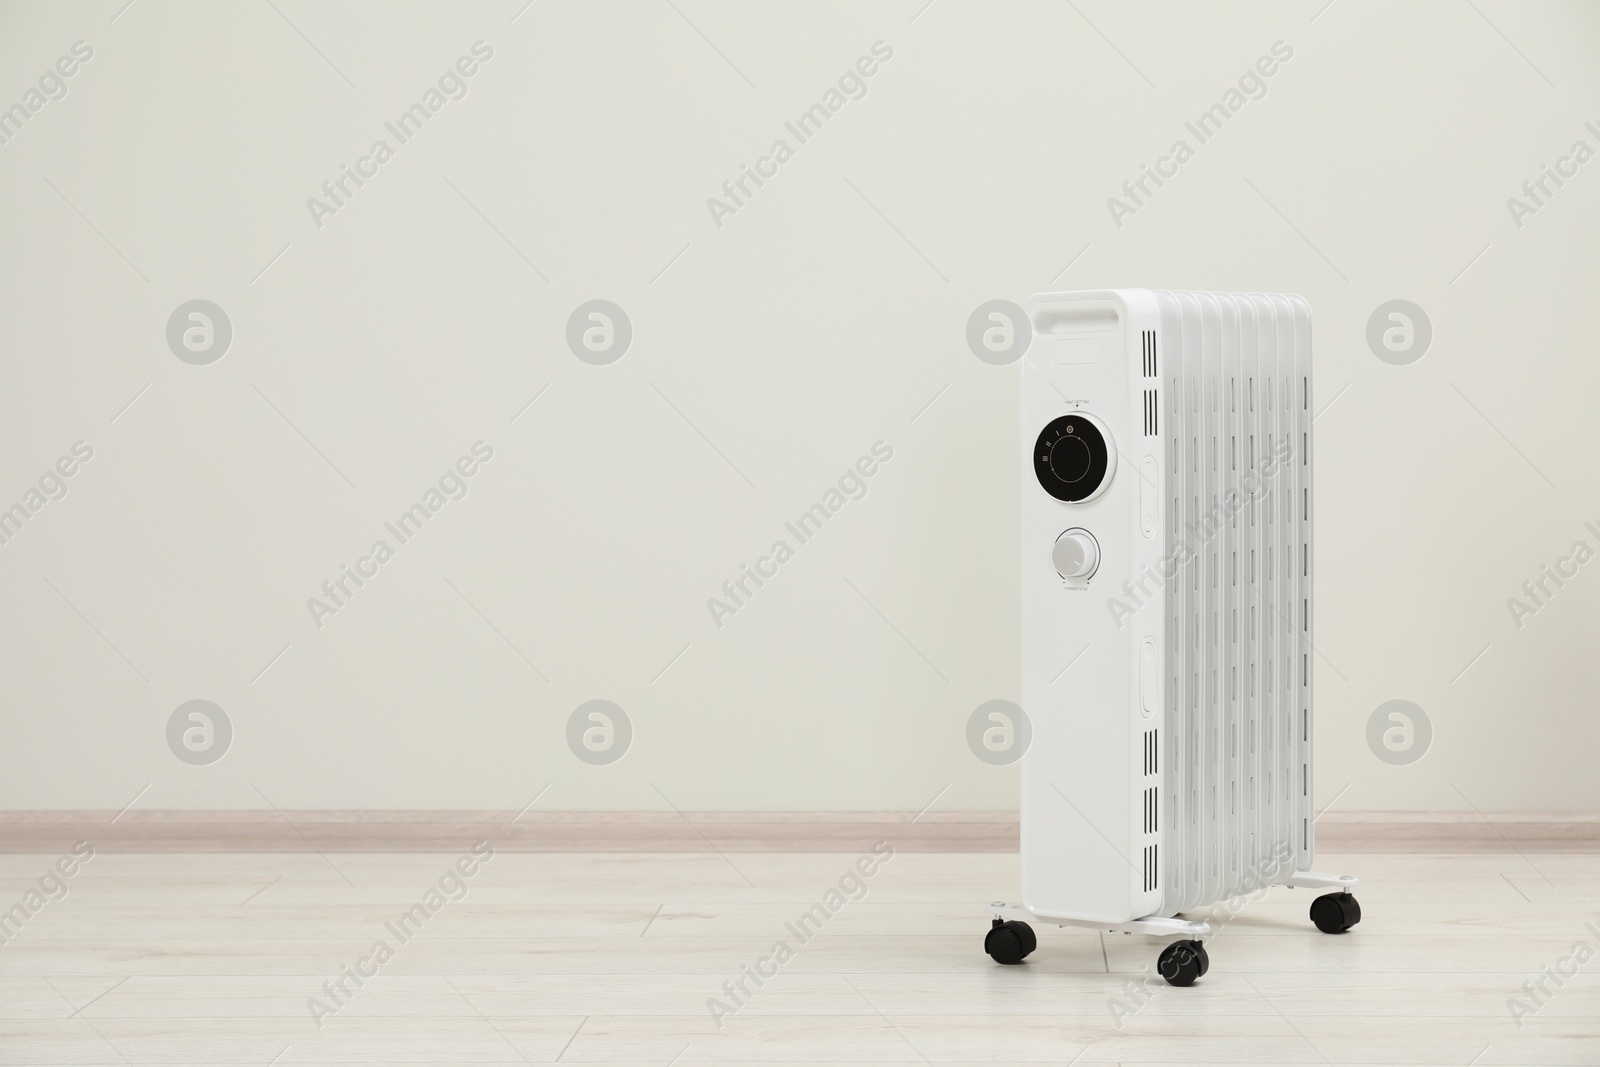 Photo of Modern portable electric heater on floor near white wall indoors, space for text